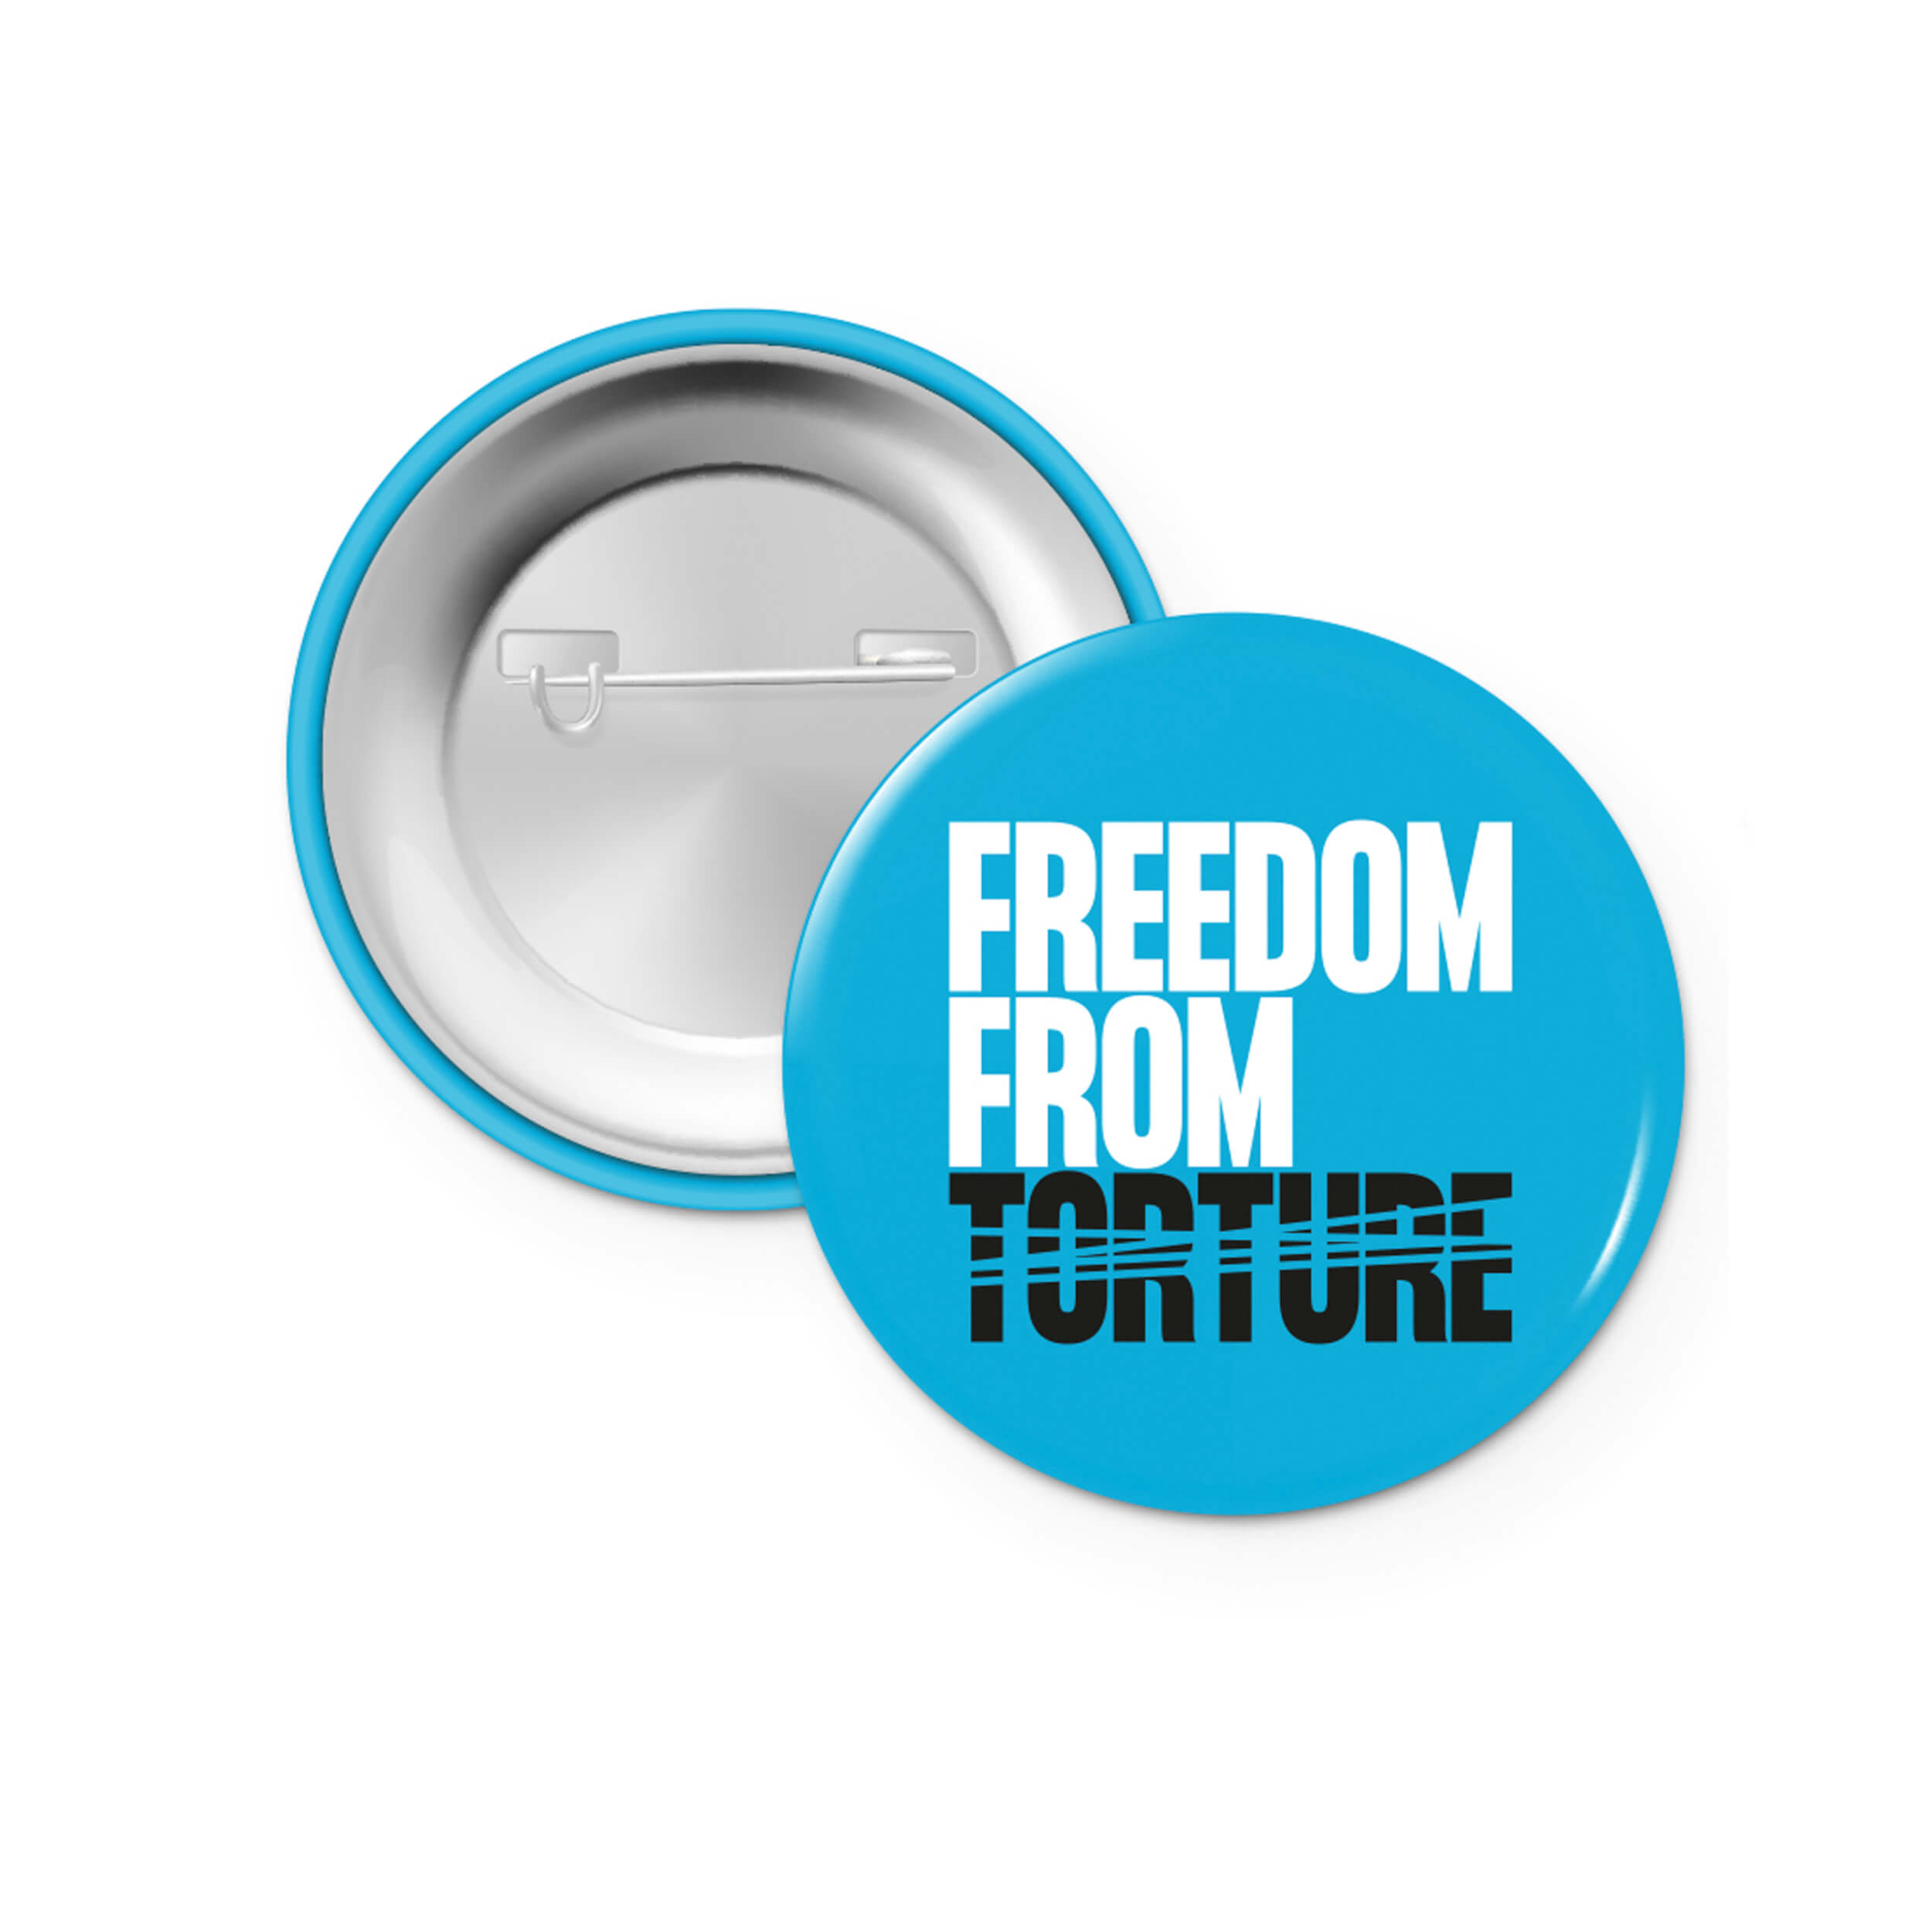 Freedom From Torture branded pin badge